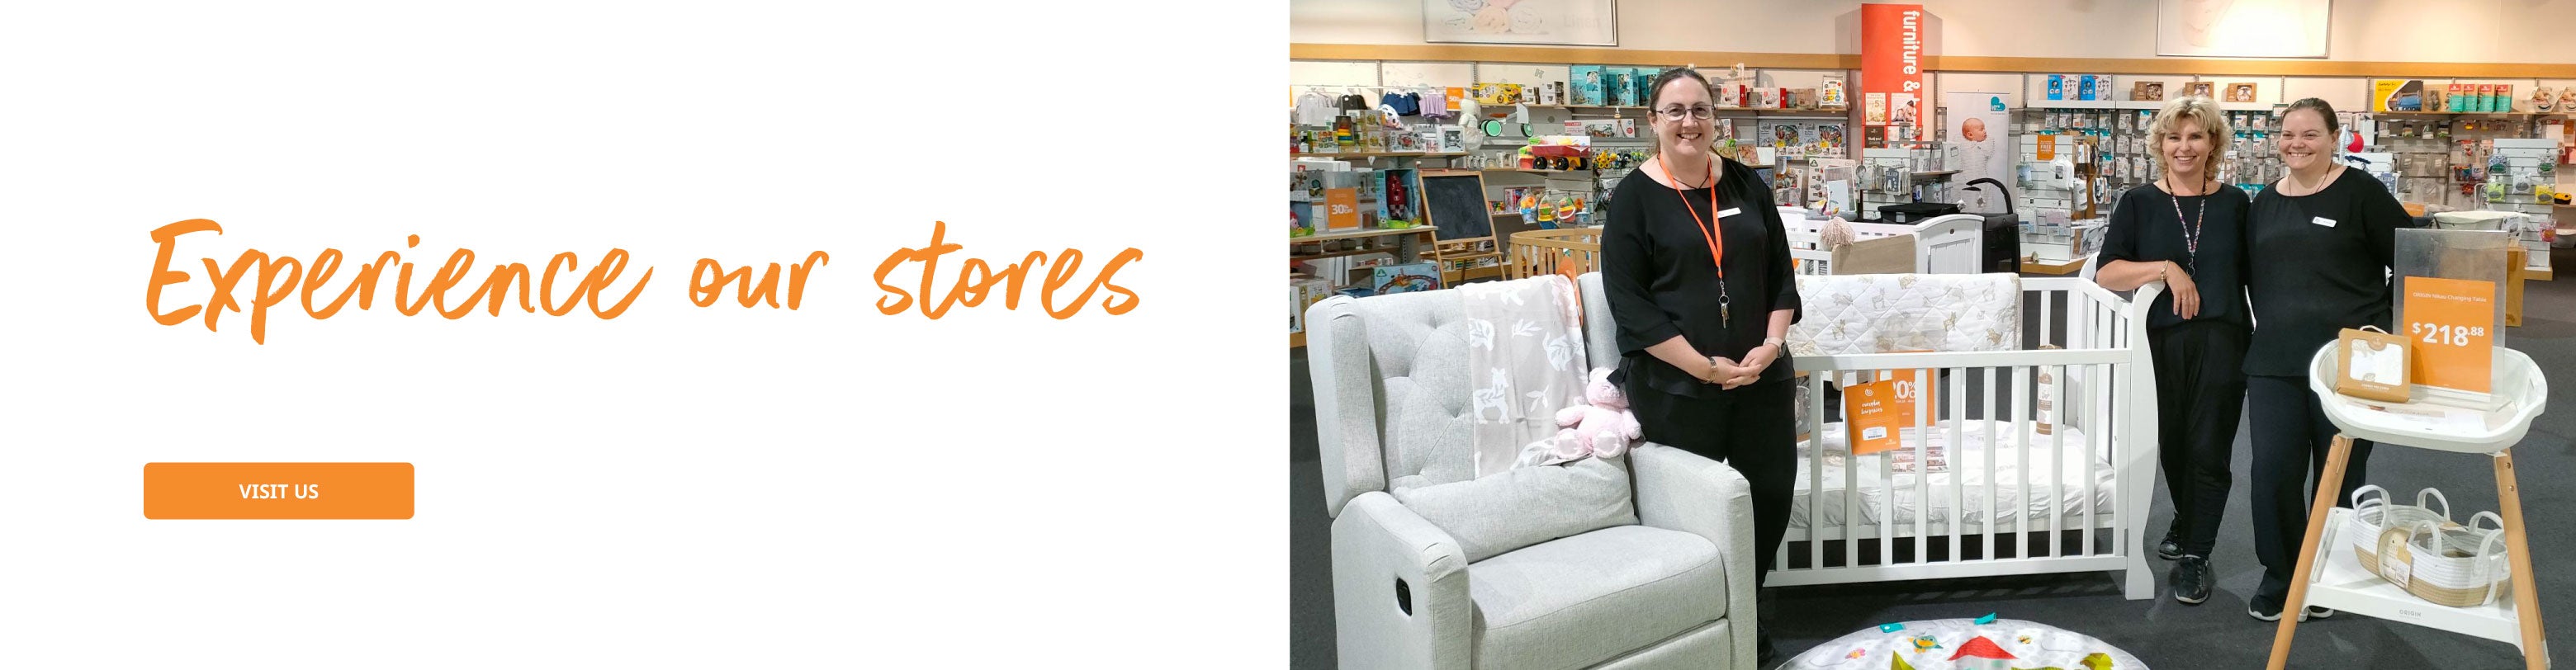 Experience our stores - Find a babycity near you